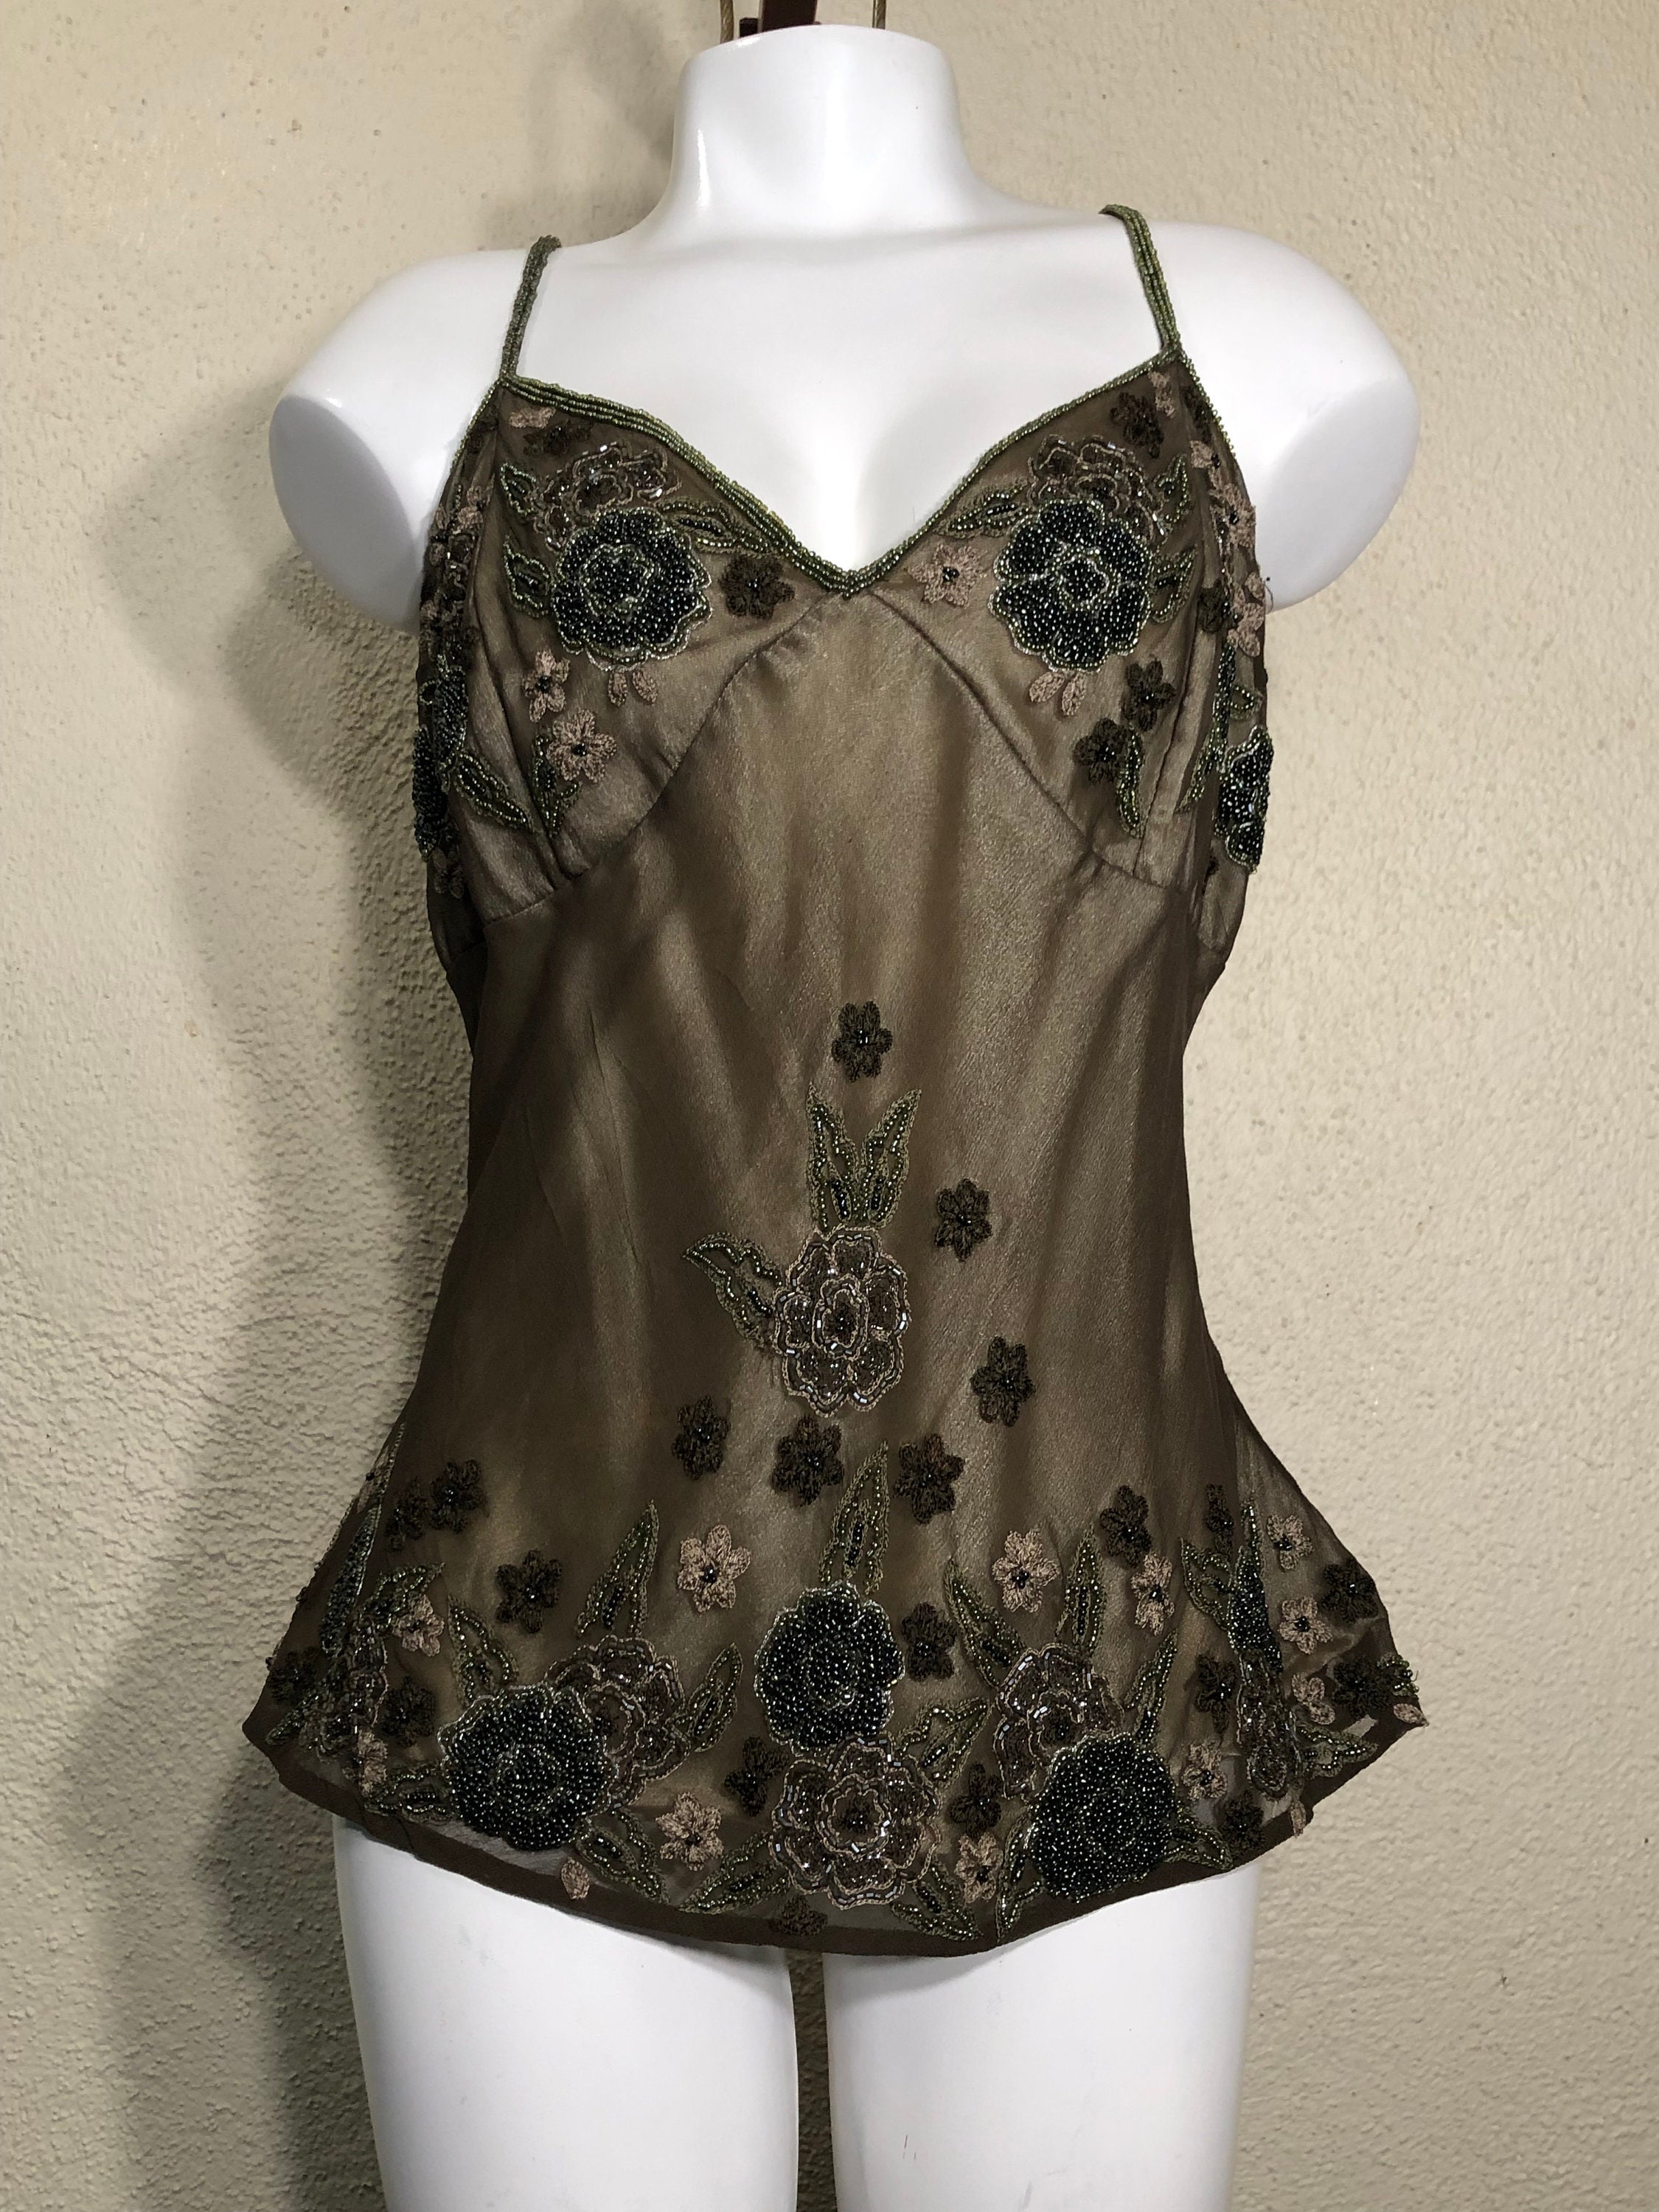 90s Vintage Emerald Green Floral Lace Sheer Cami Top [M] – The